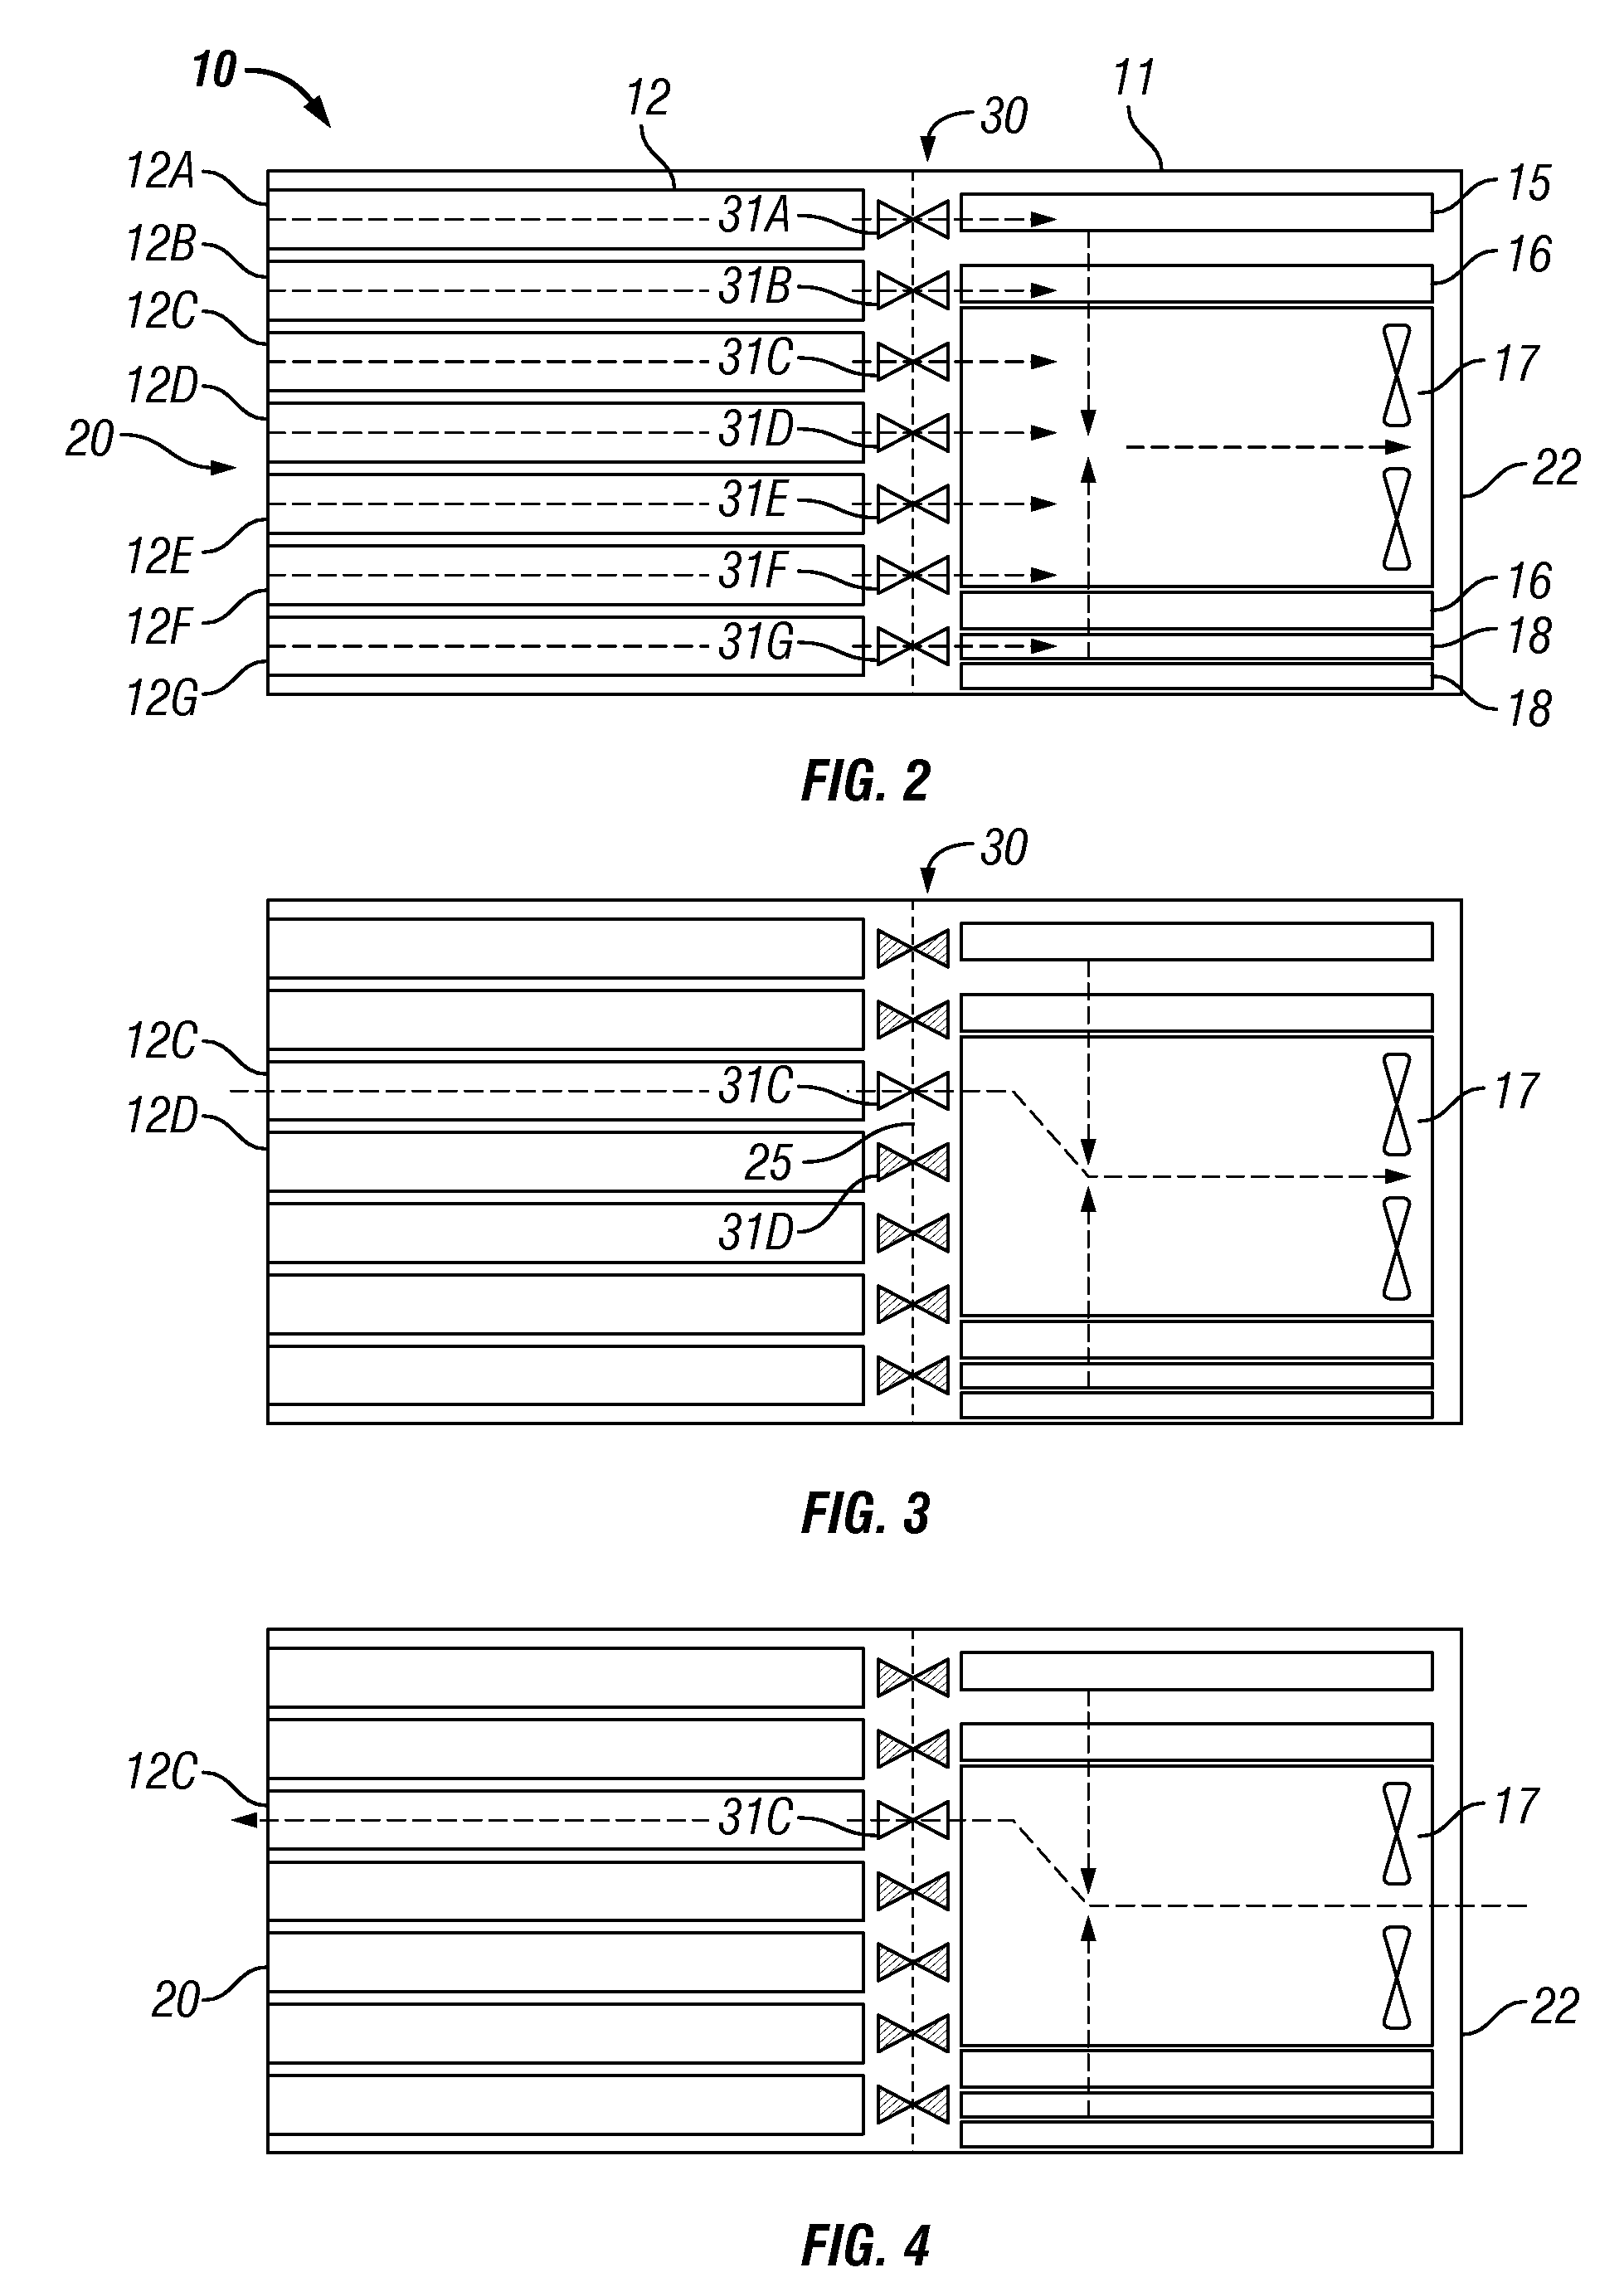 Airflow control and dust removal for electronic systems